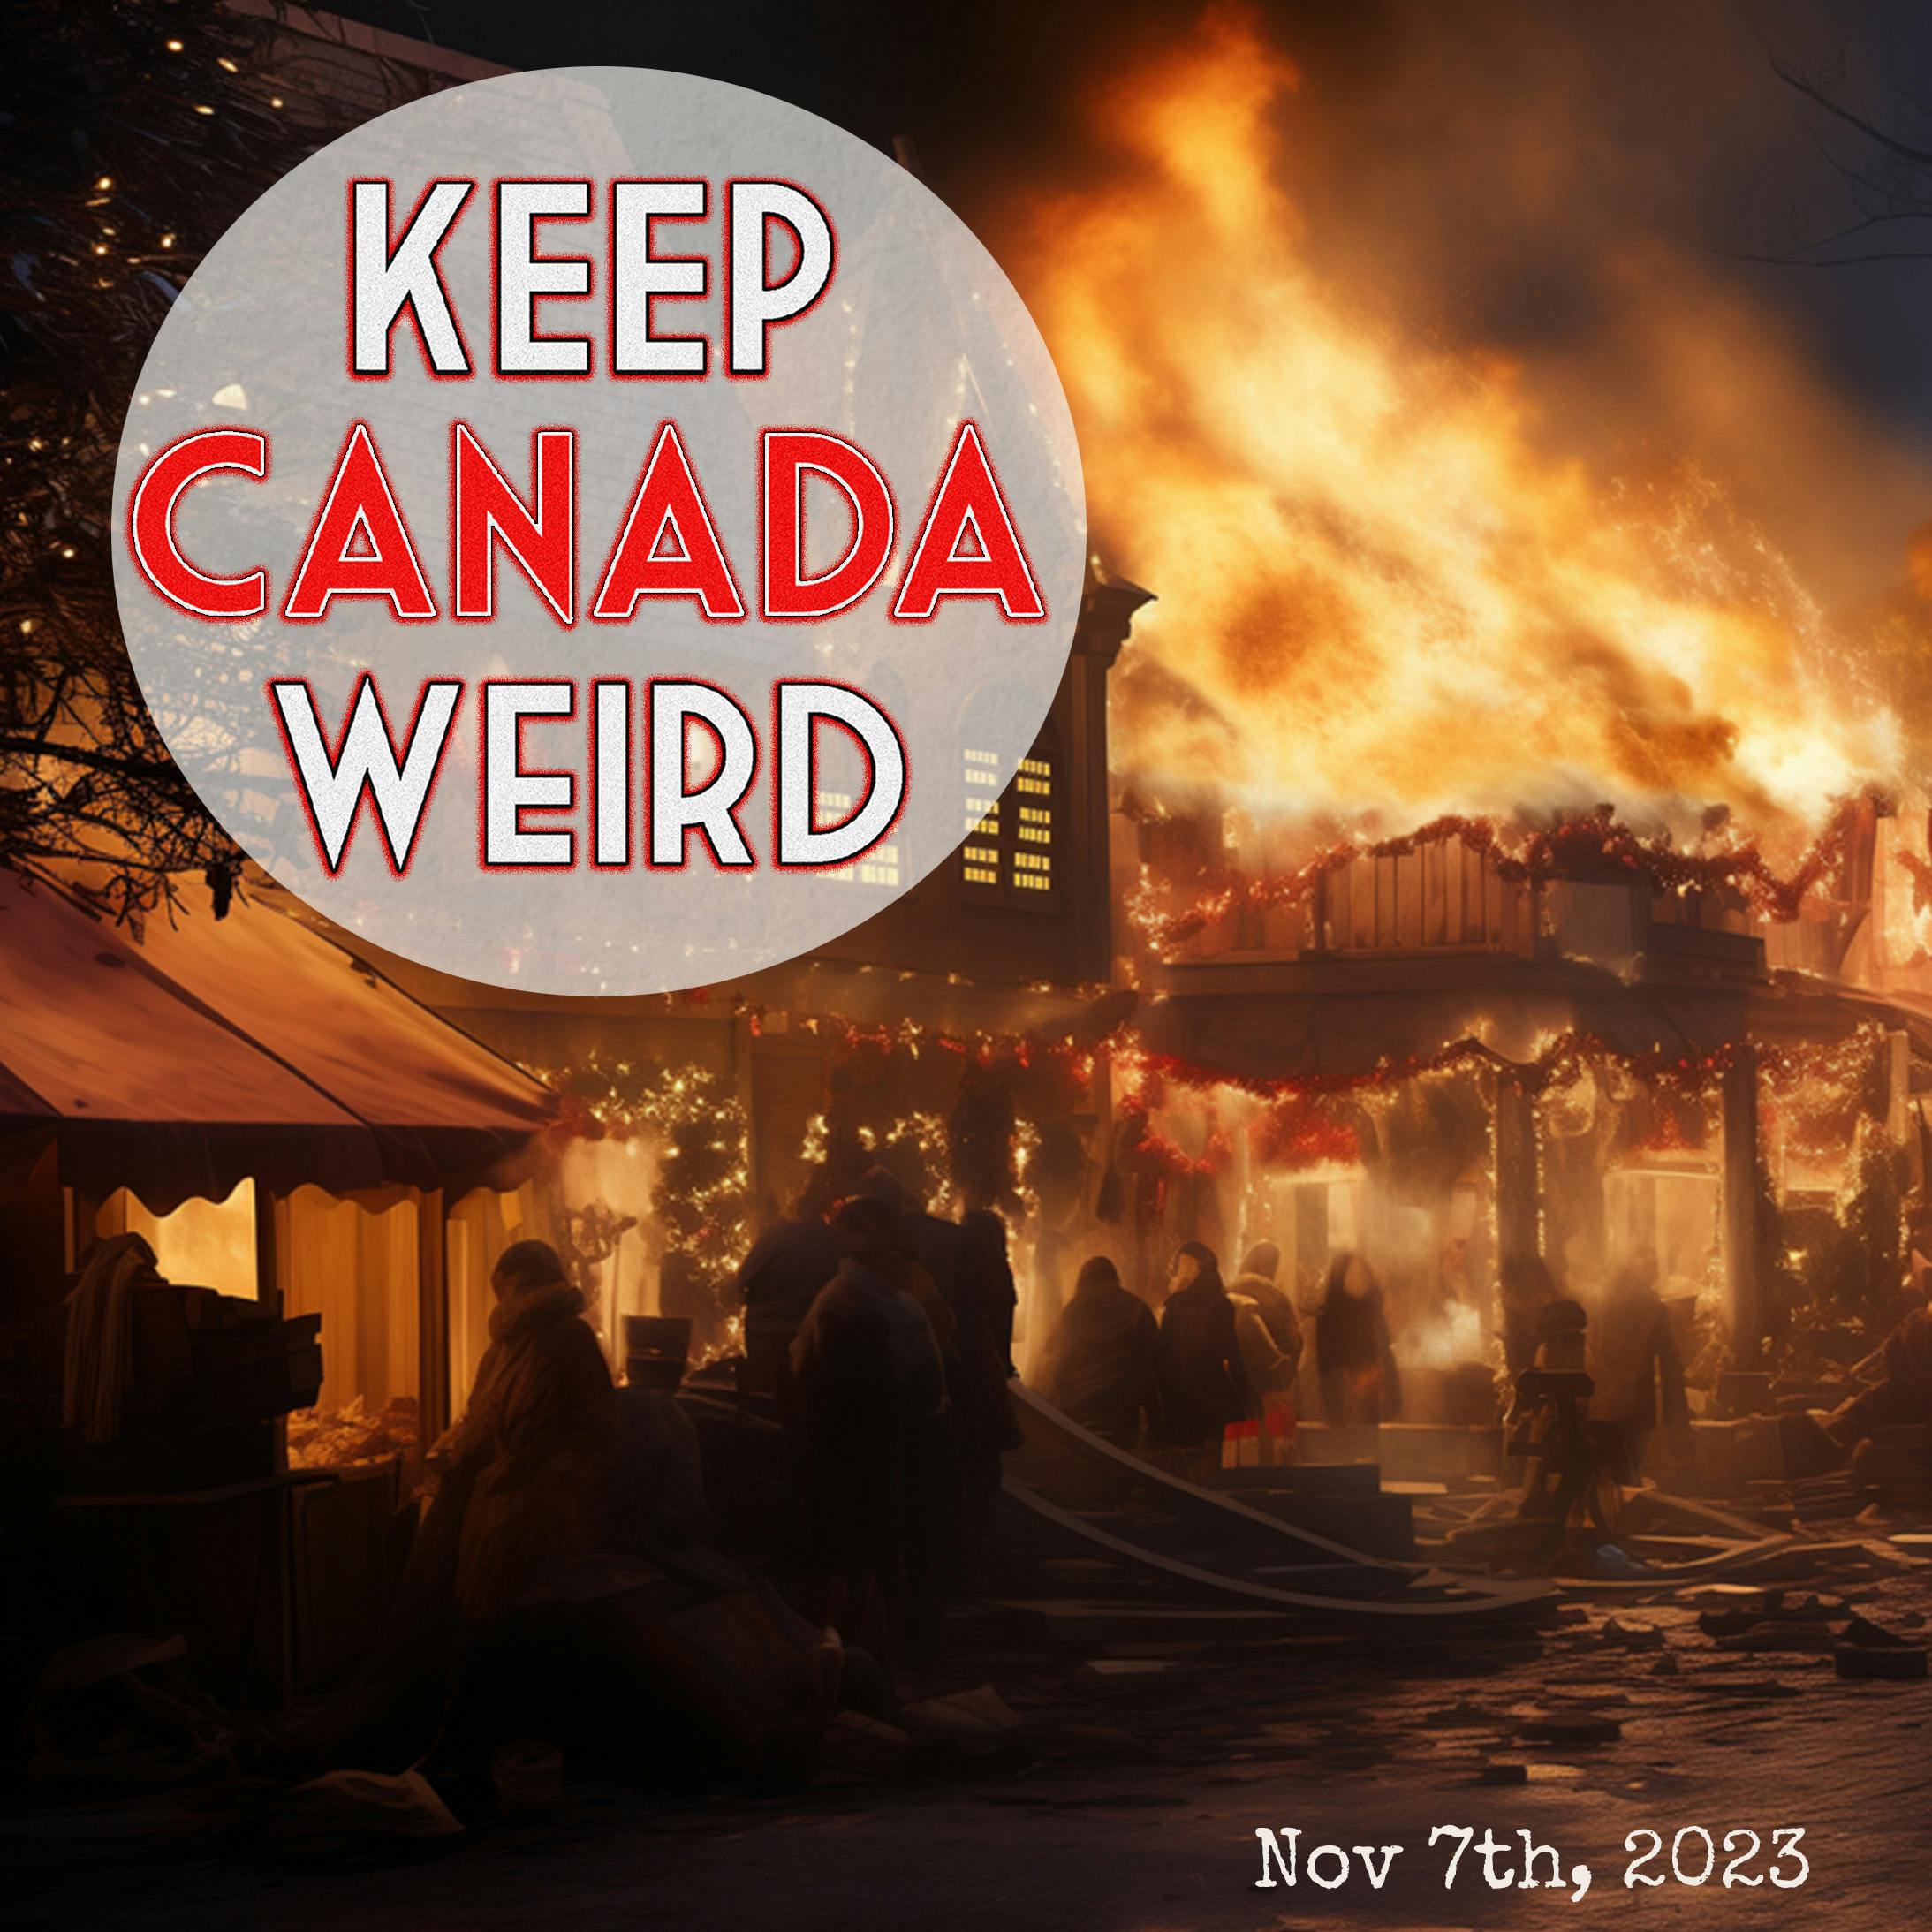 KEEP CANADA WEIRD - Nov 7th, 2023 - a dumpster fire of a Christmas craft market, 55 million dollars, and parking meters